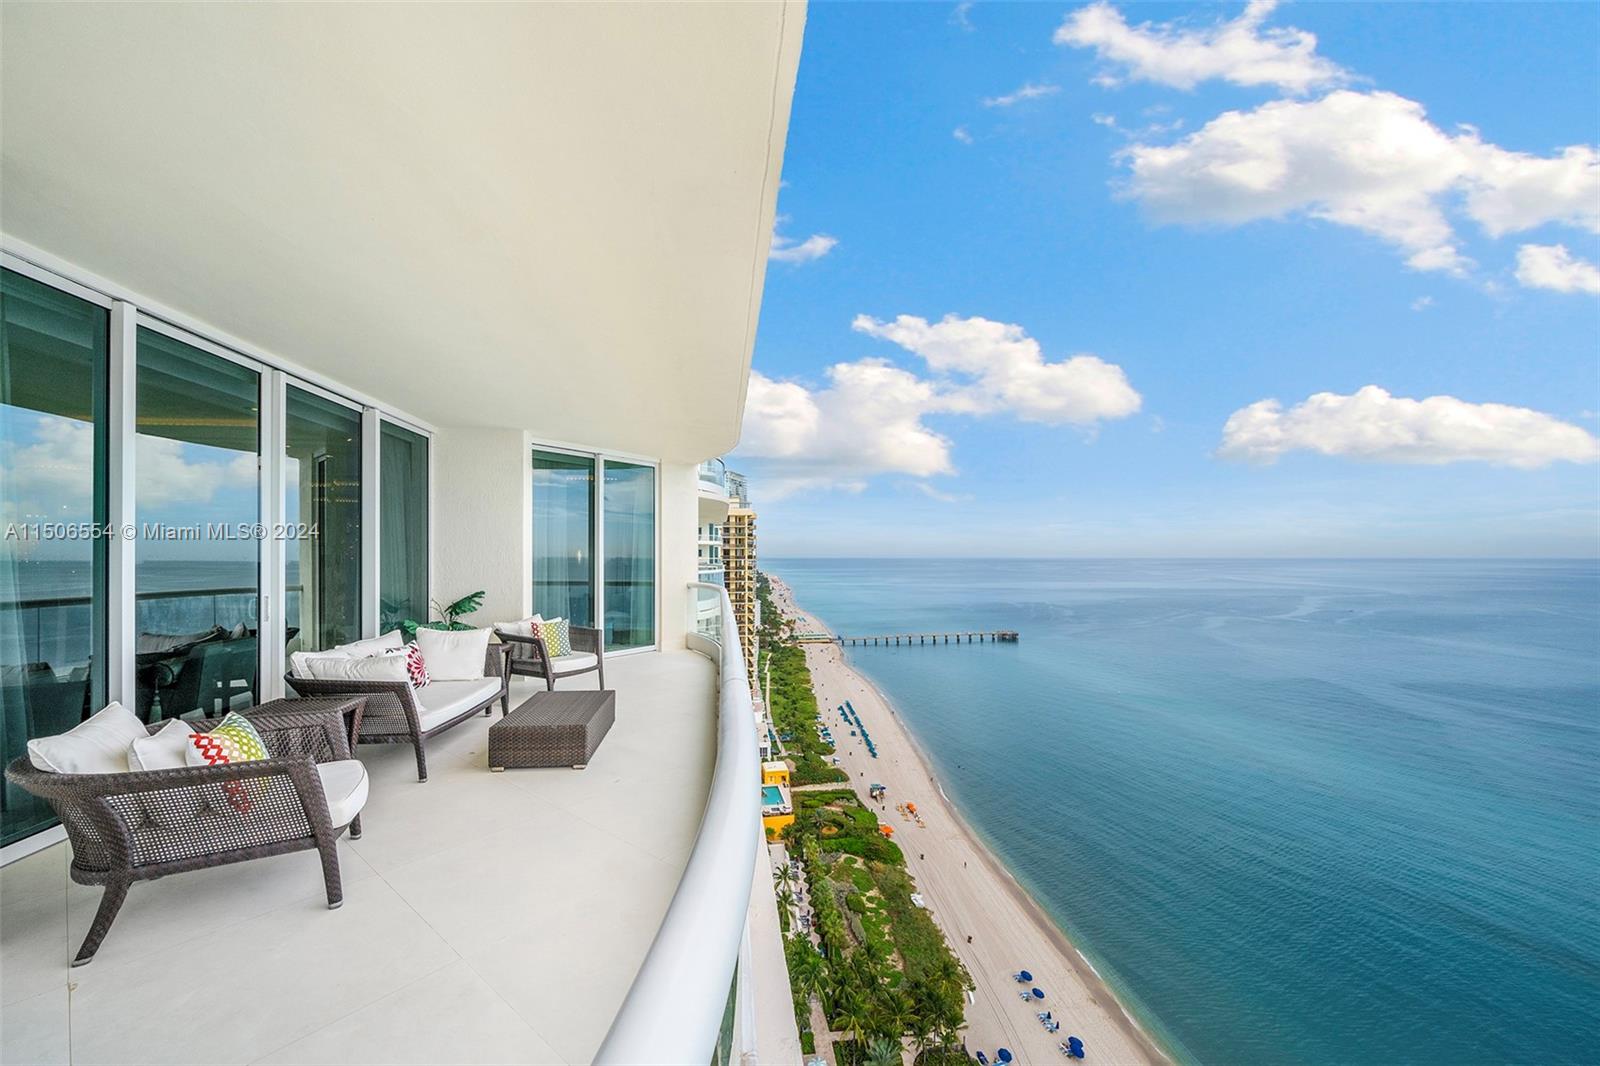 Property for Sale at 16047 Collins Ave 2603, Sunny Isles Beach, Miami-Dade County, Florida - Bedrooms: 3 
Bathrooms: 6  - $4,850,000